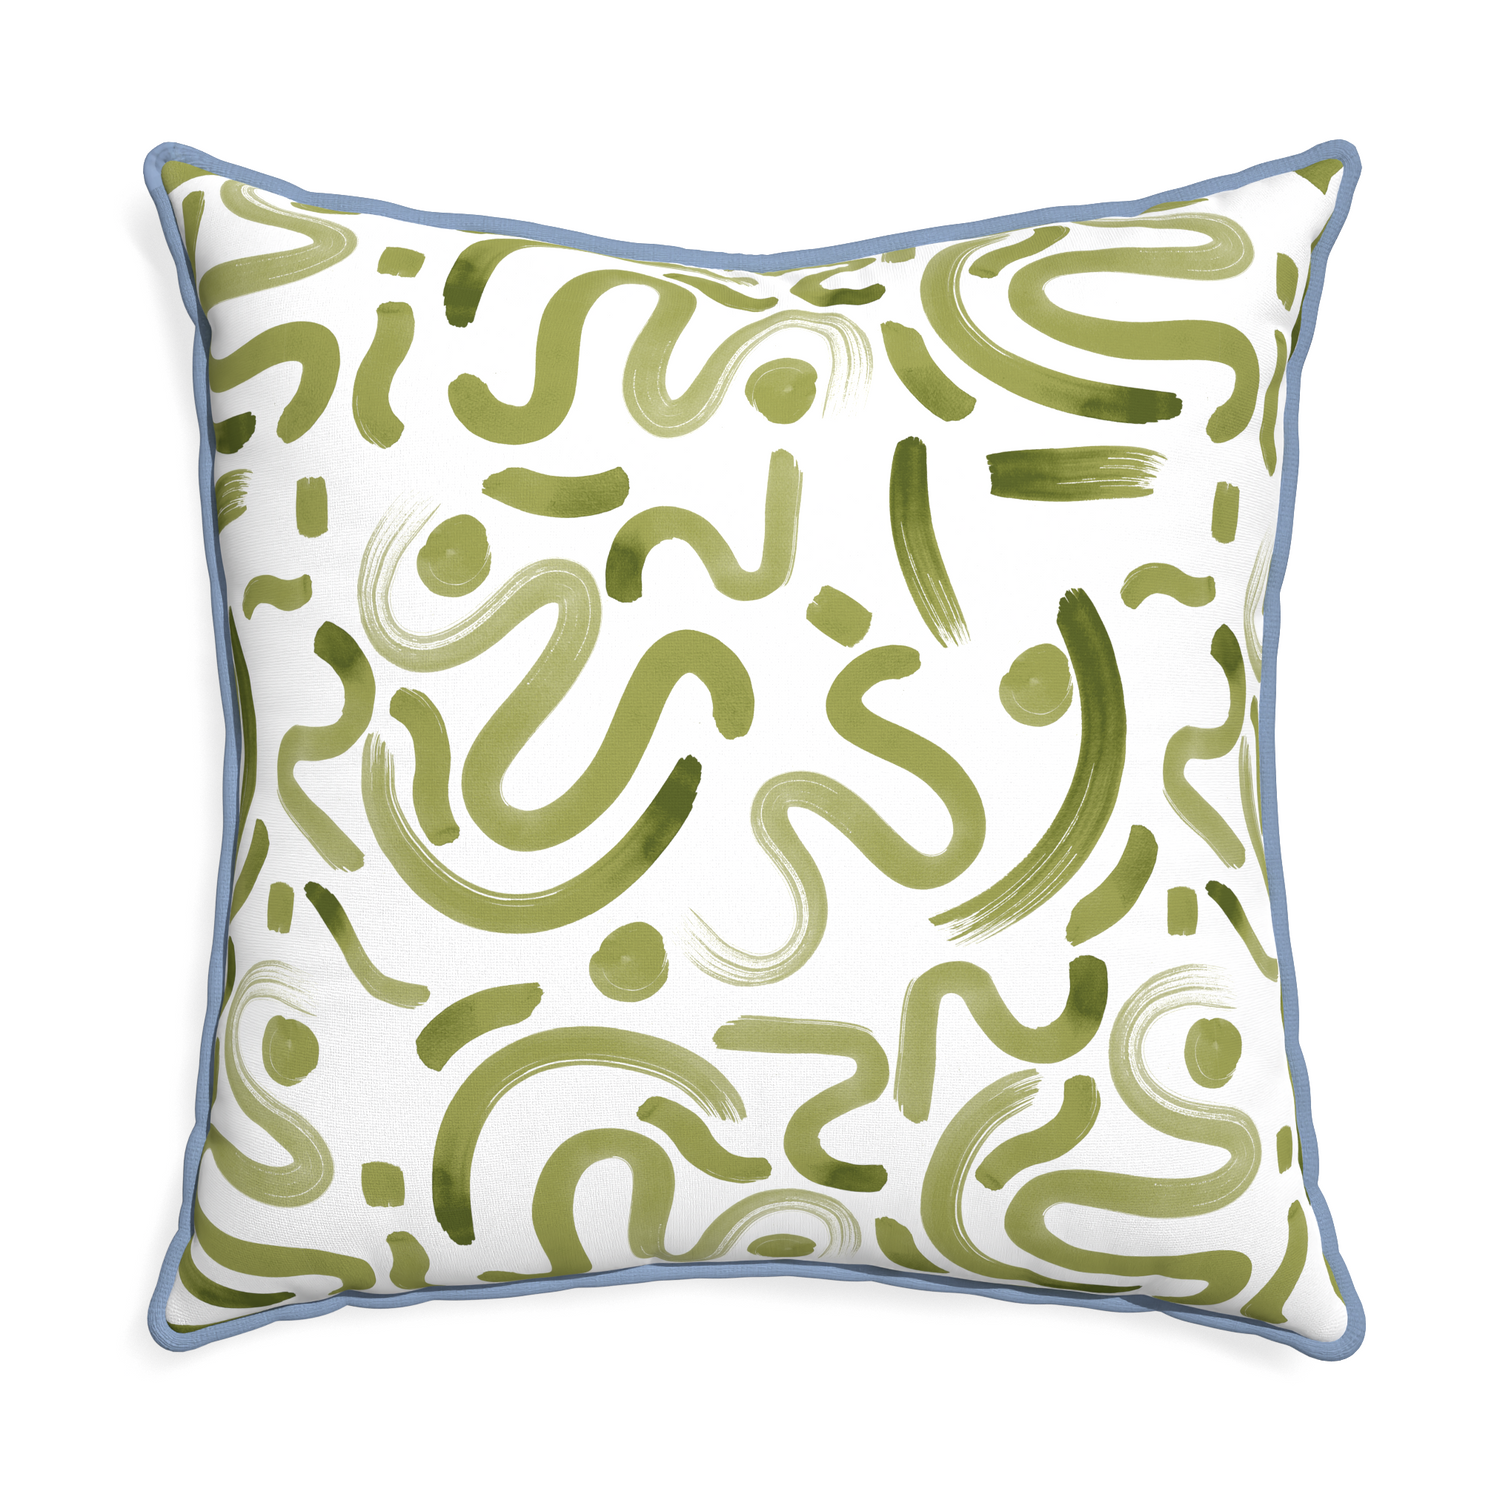 Euro-sham hockney moss custom moss greenpillow with sky piping on white background